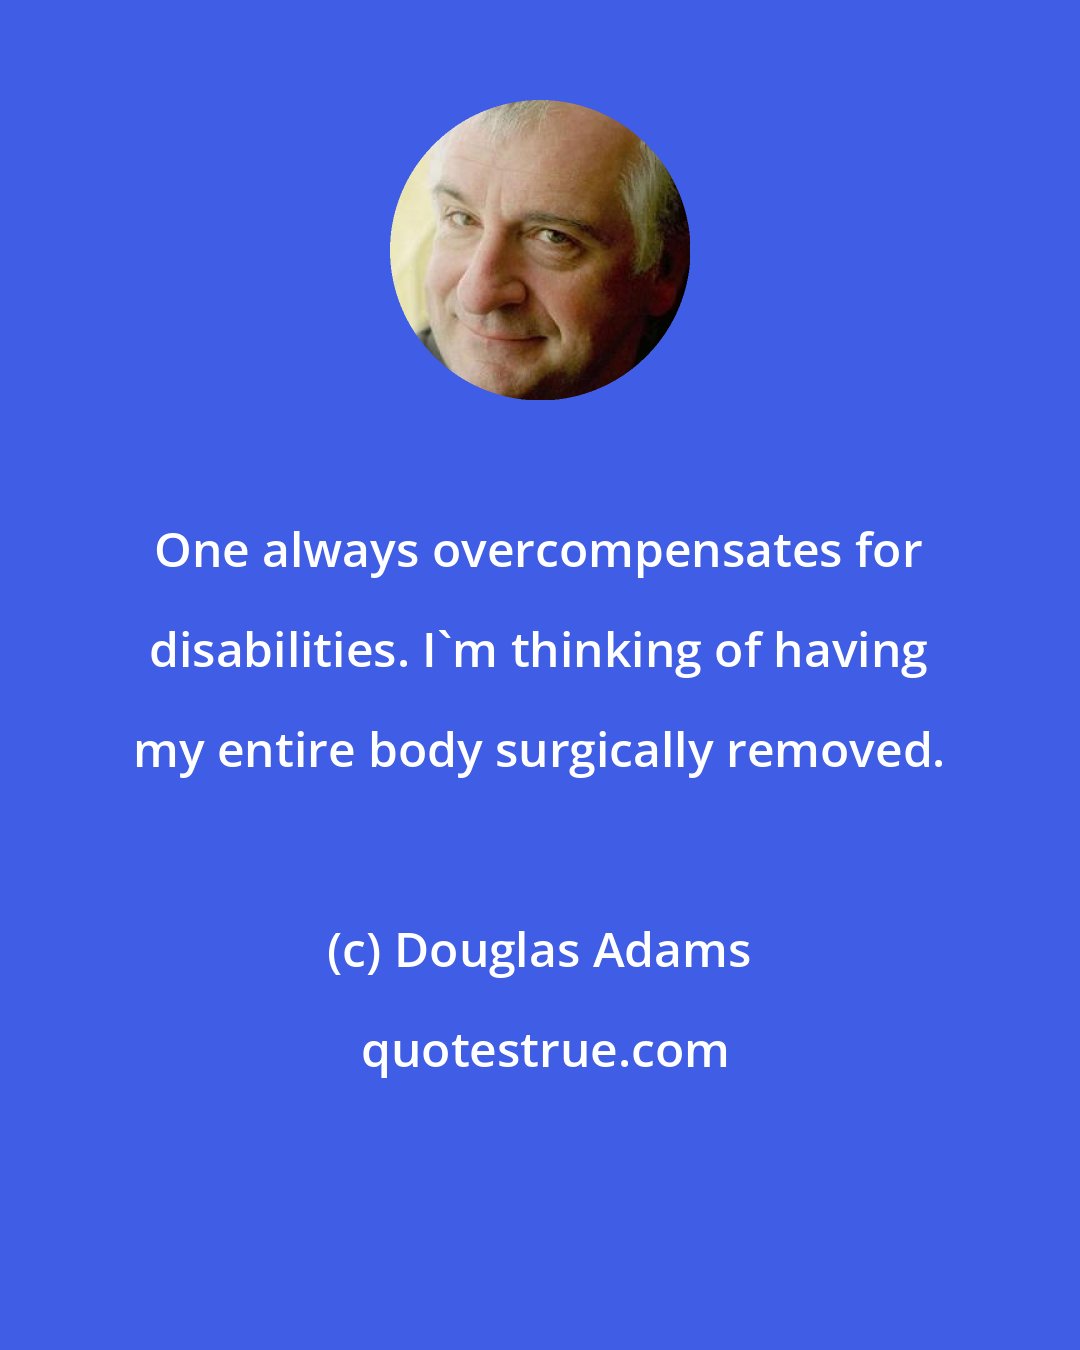 Douglas Adams: One always overcompensates for disabilities. I'm thinking of having my entire body surgically removed.